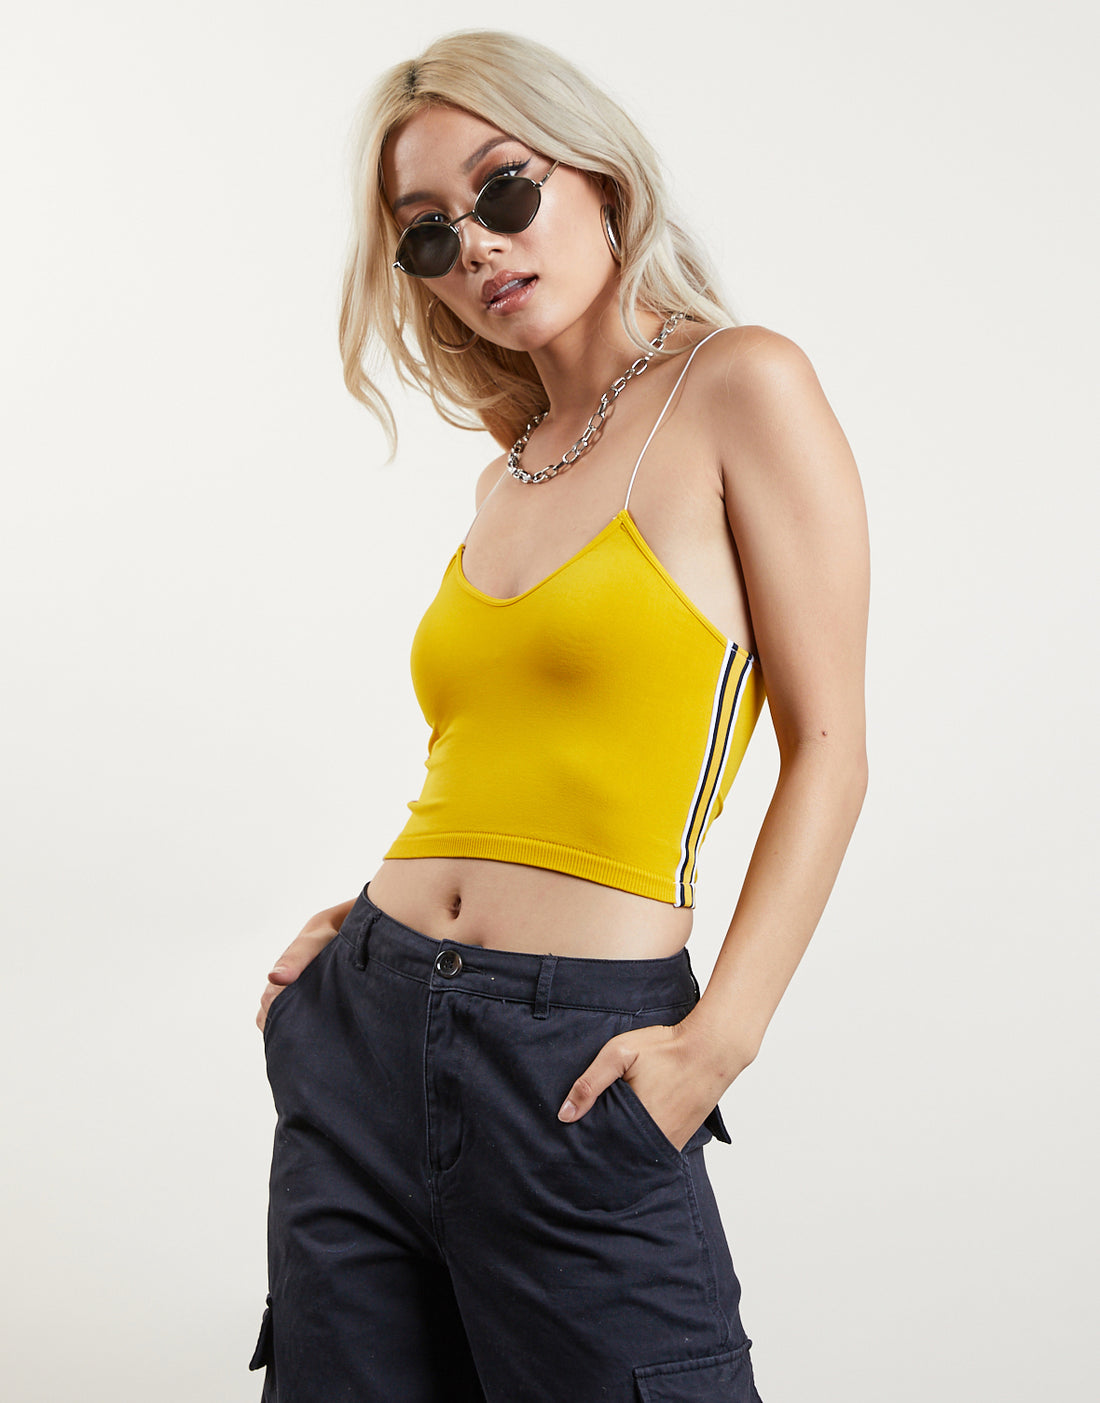 Stretch It Out Sporty Crop Top Tops Marigold One Size -2020AVE